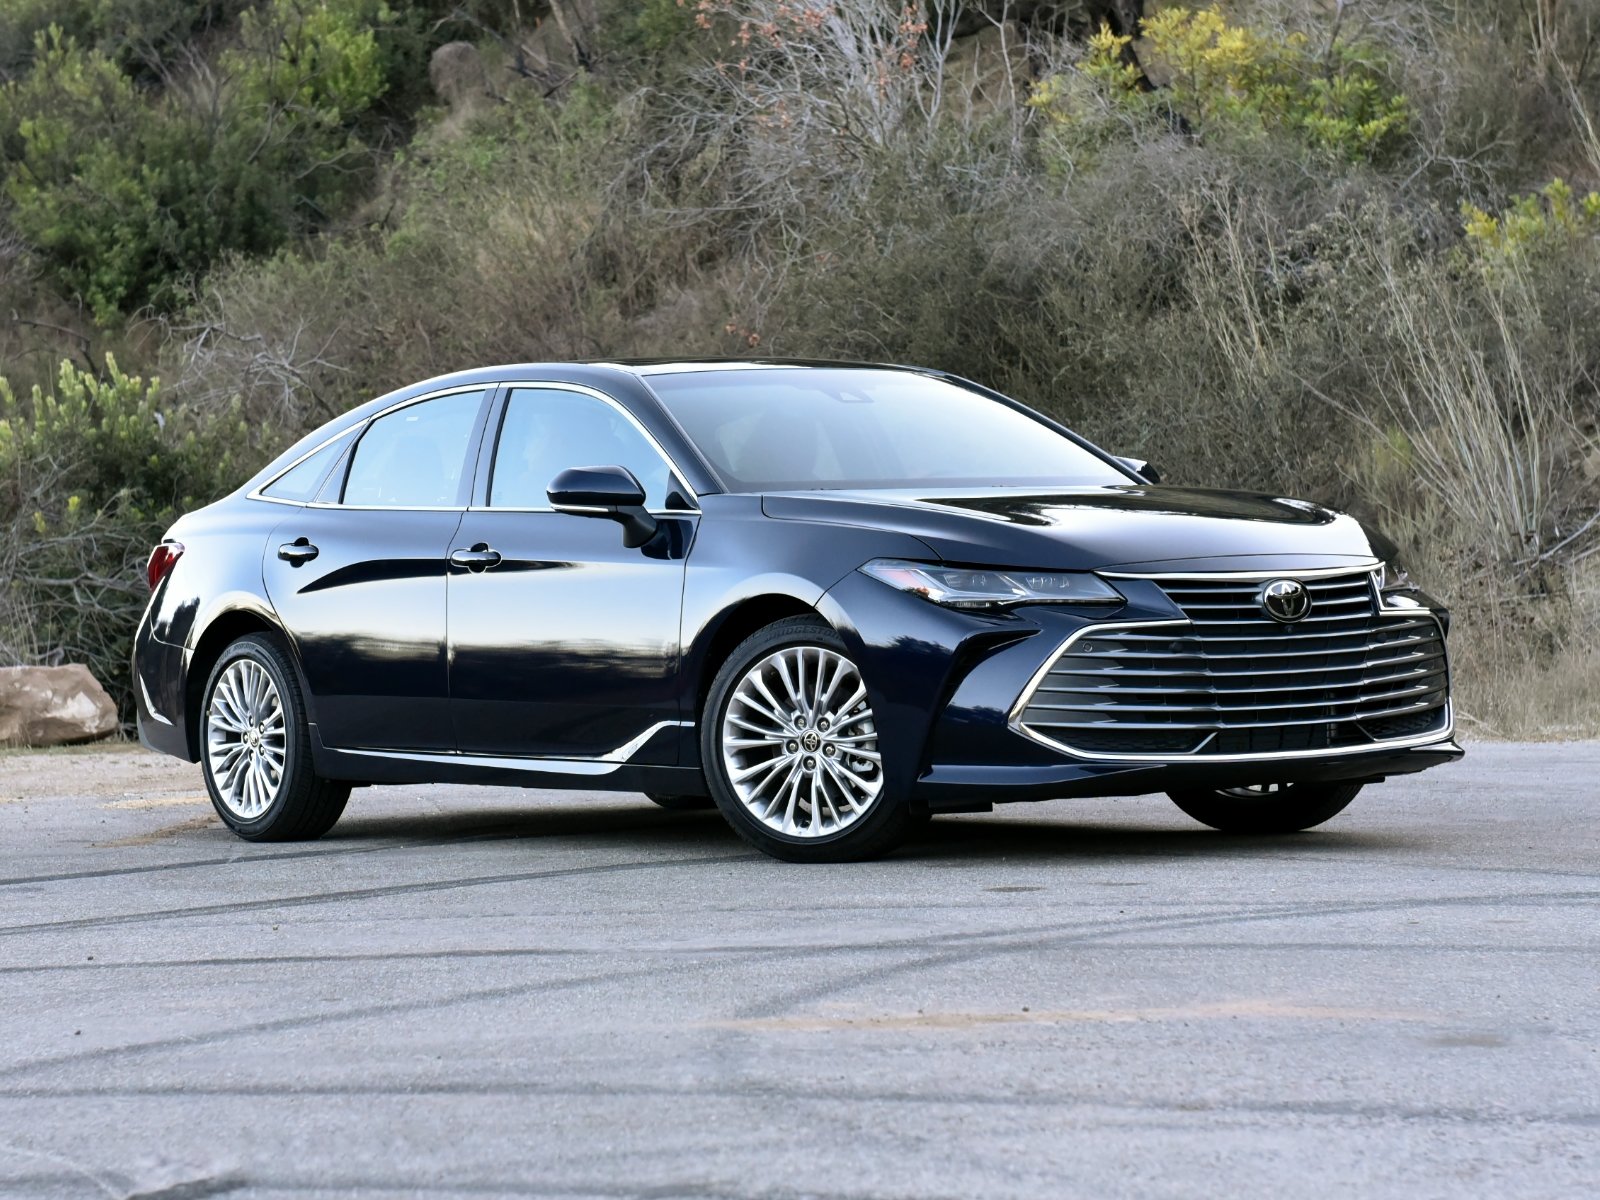 2021 Toyota Avalon: Prices, Reviews & Pictures - CarGurus